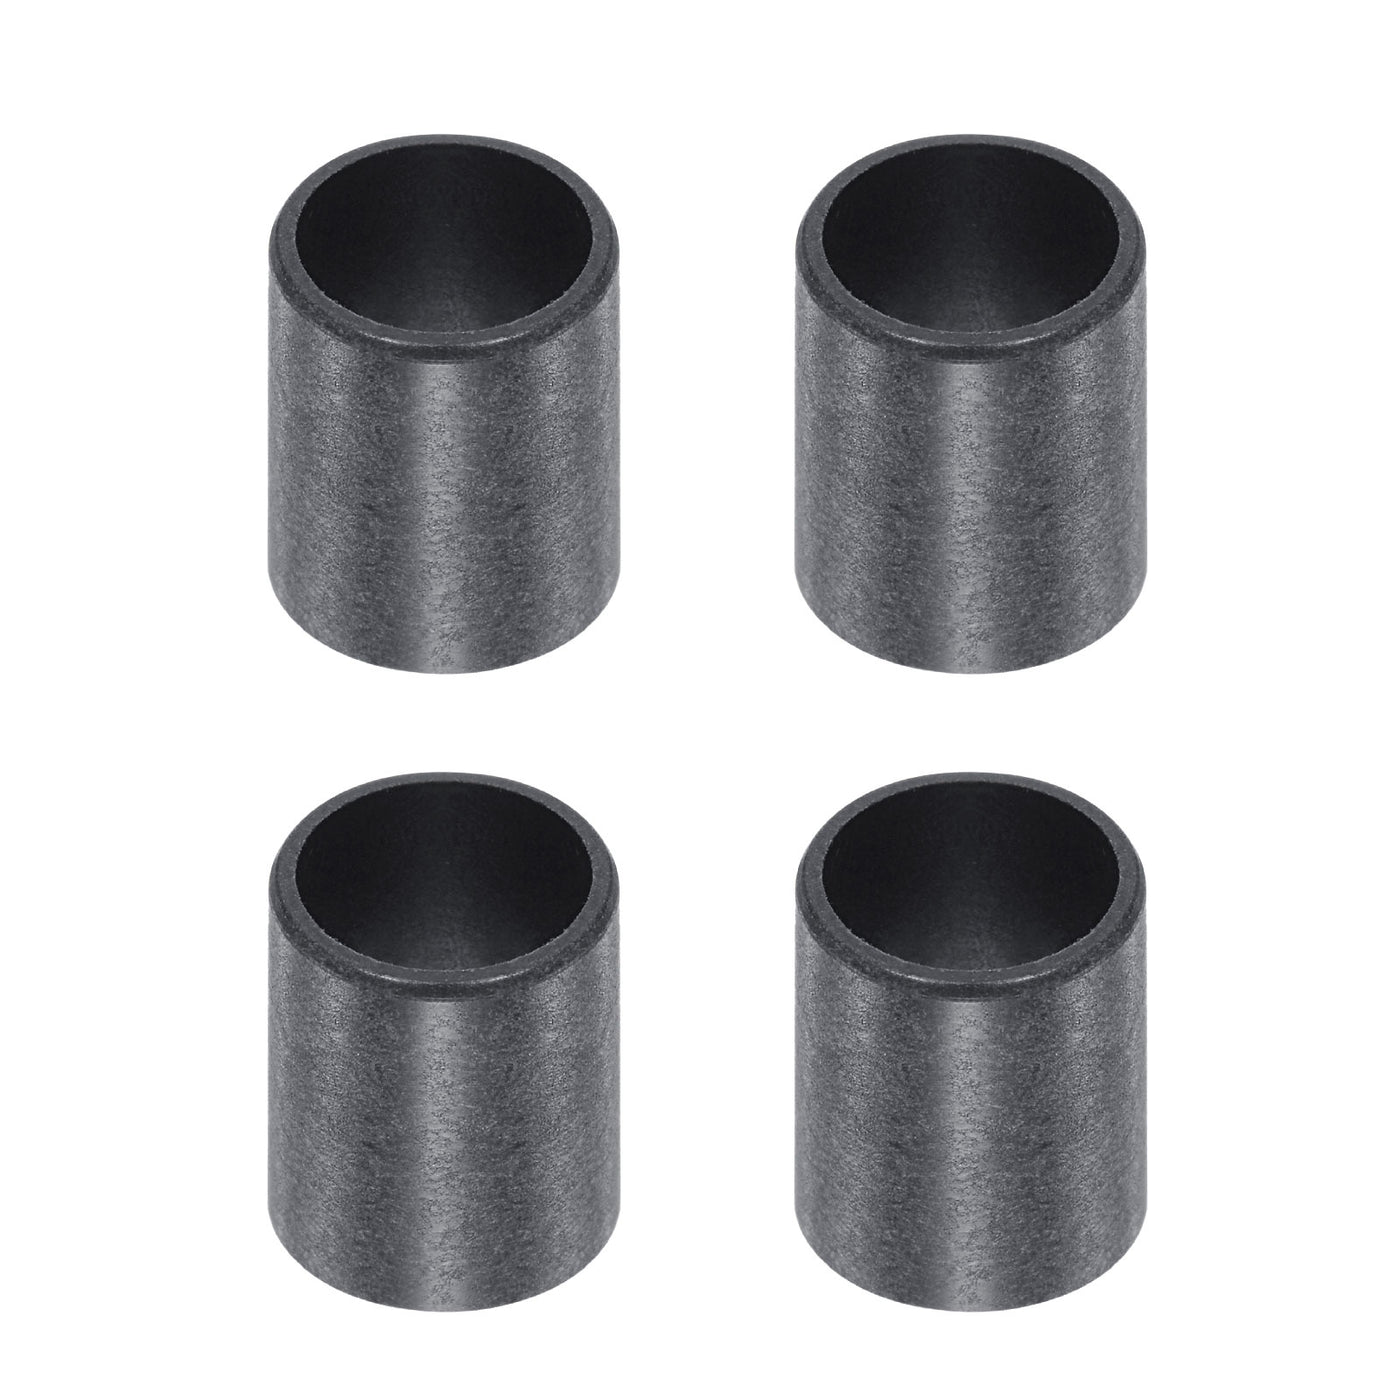 uxcell Uxcell Sleeve Bearings 10mmx12mmx15mm POM Wrapped Oilless Bushings Black 4pcs